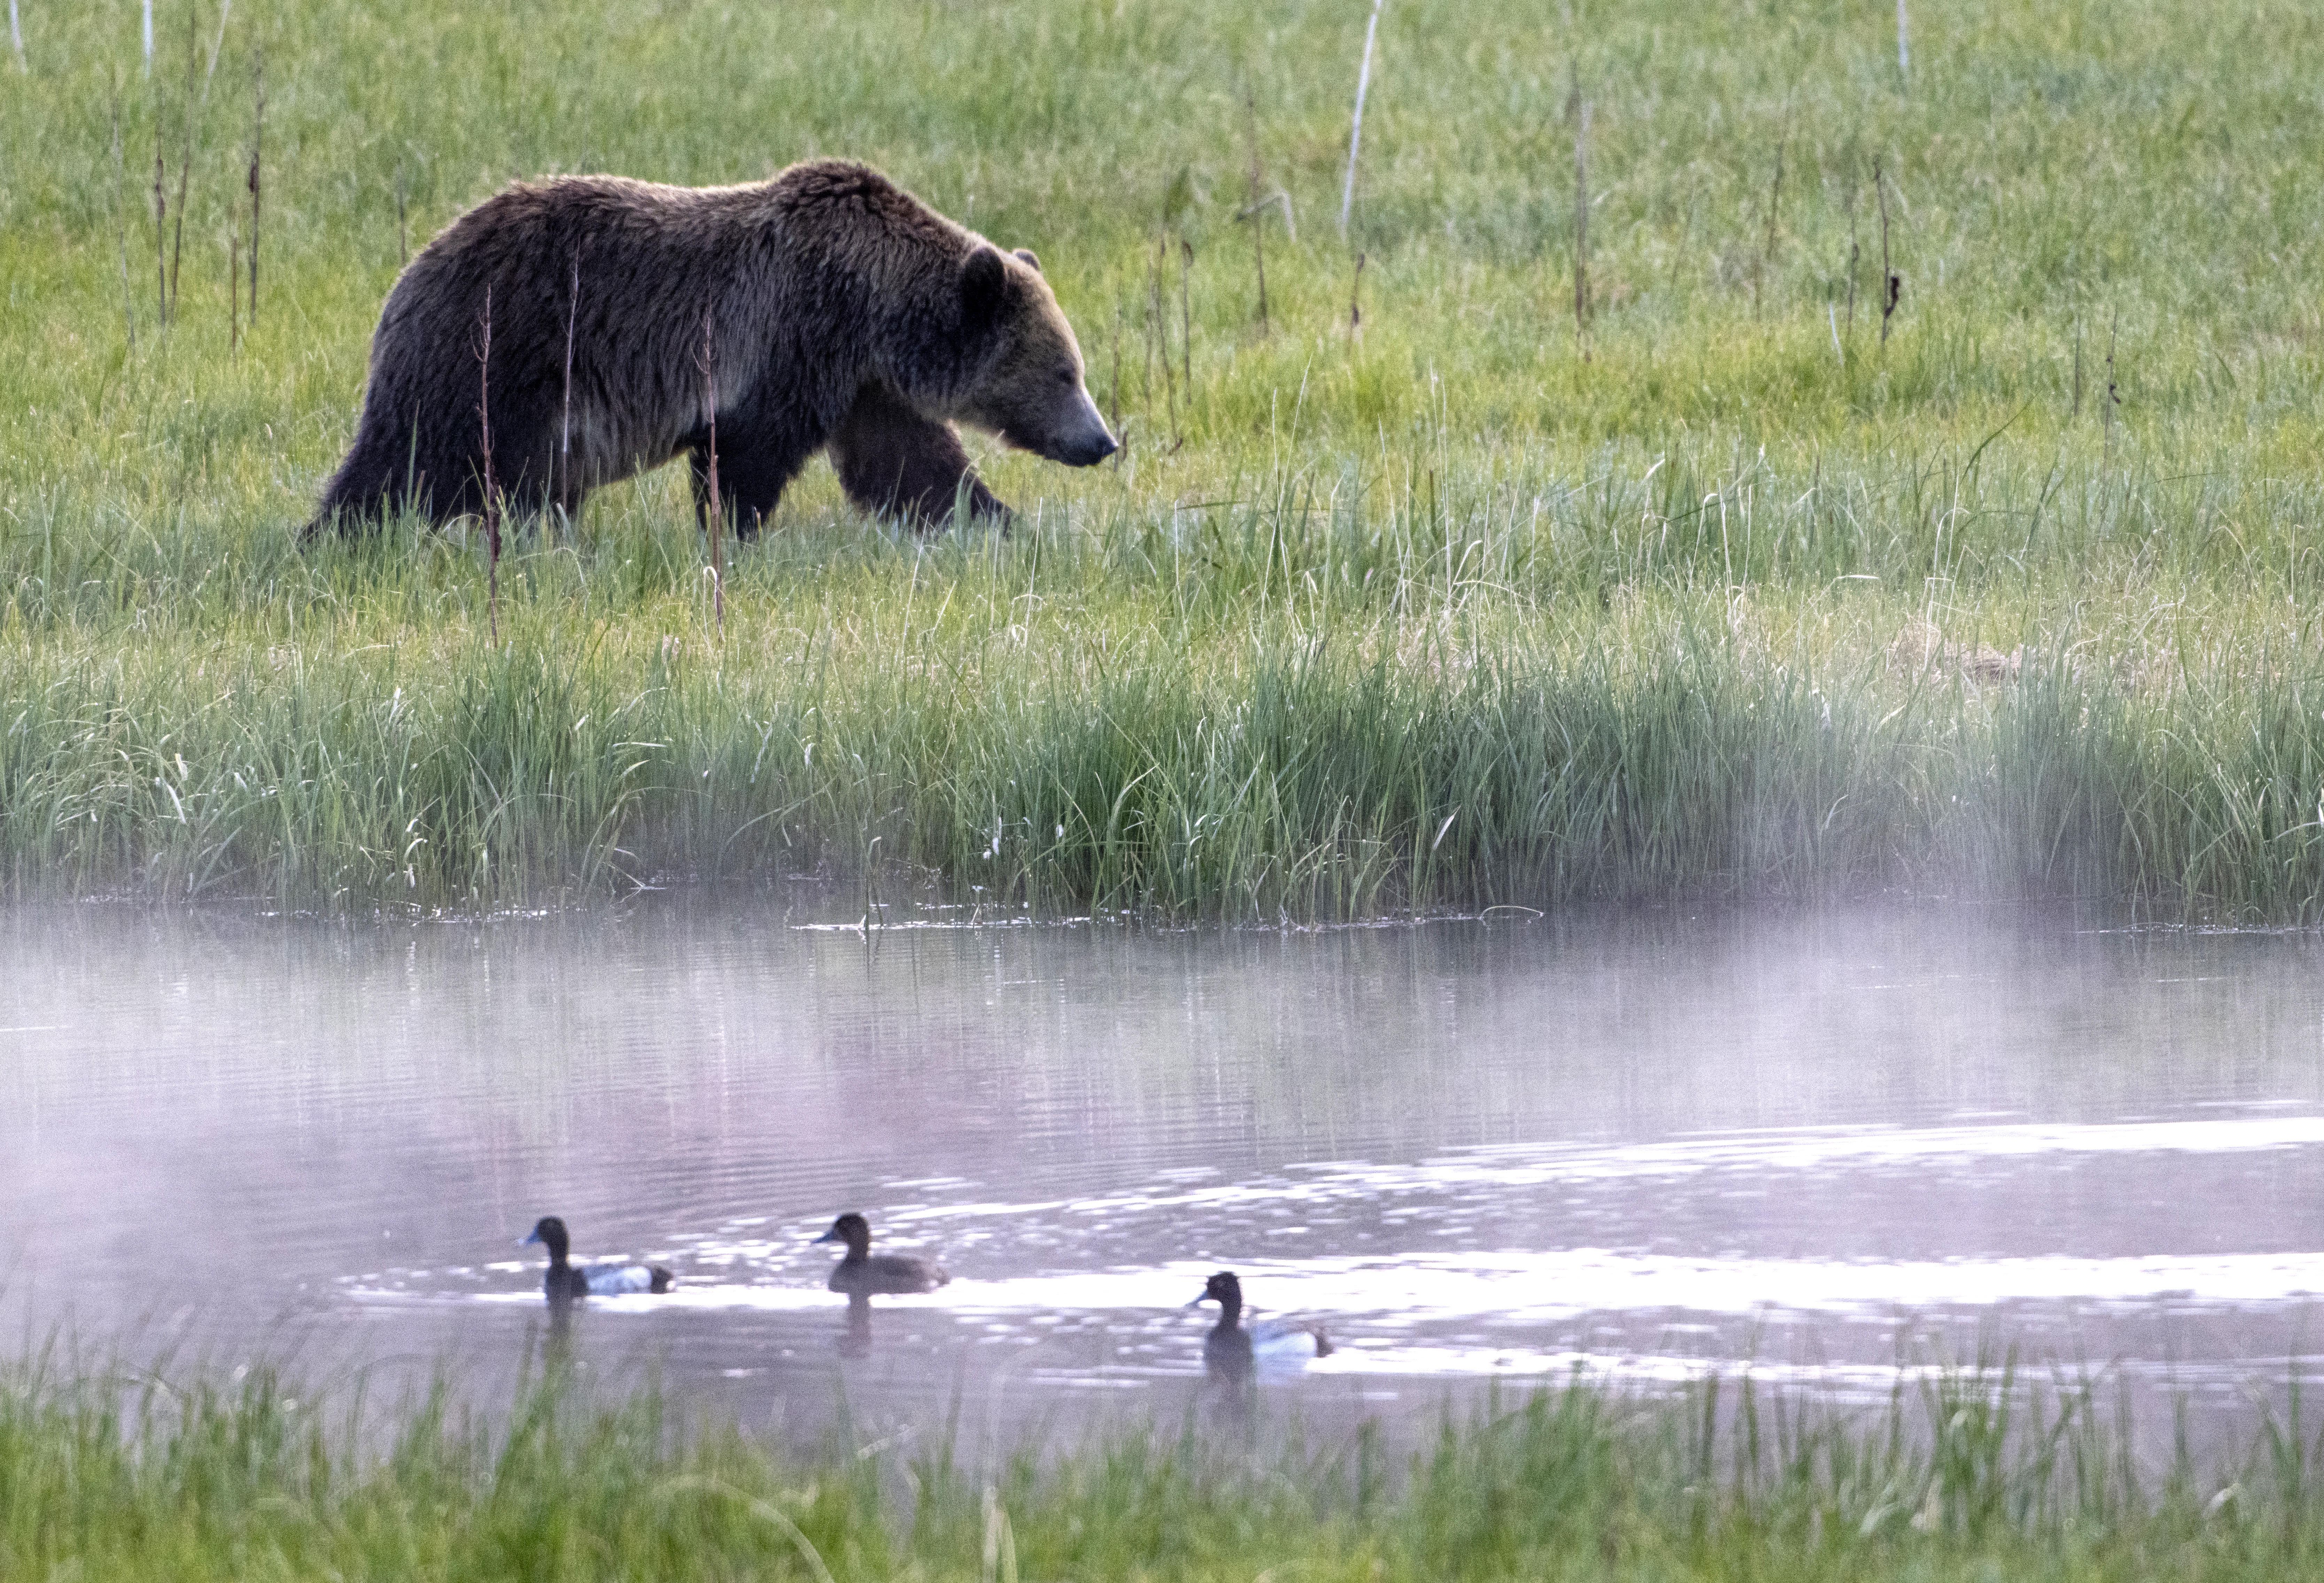 Man picking berries in Montana kills grizzly bear in self-defense